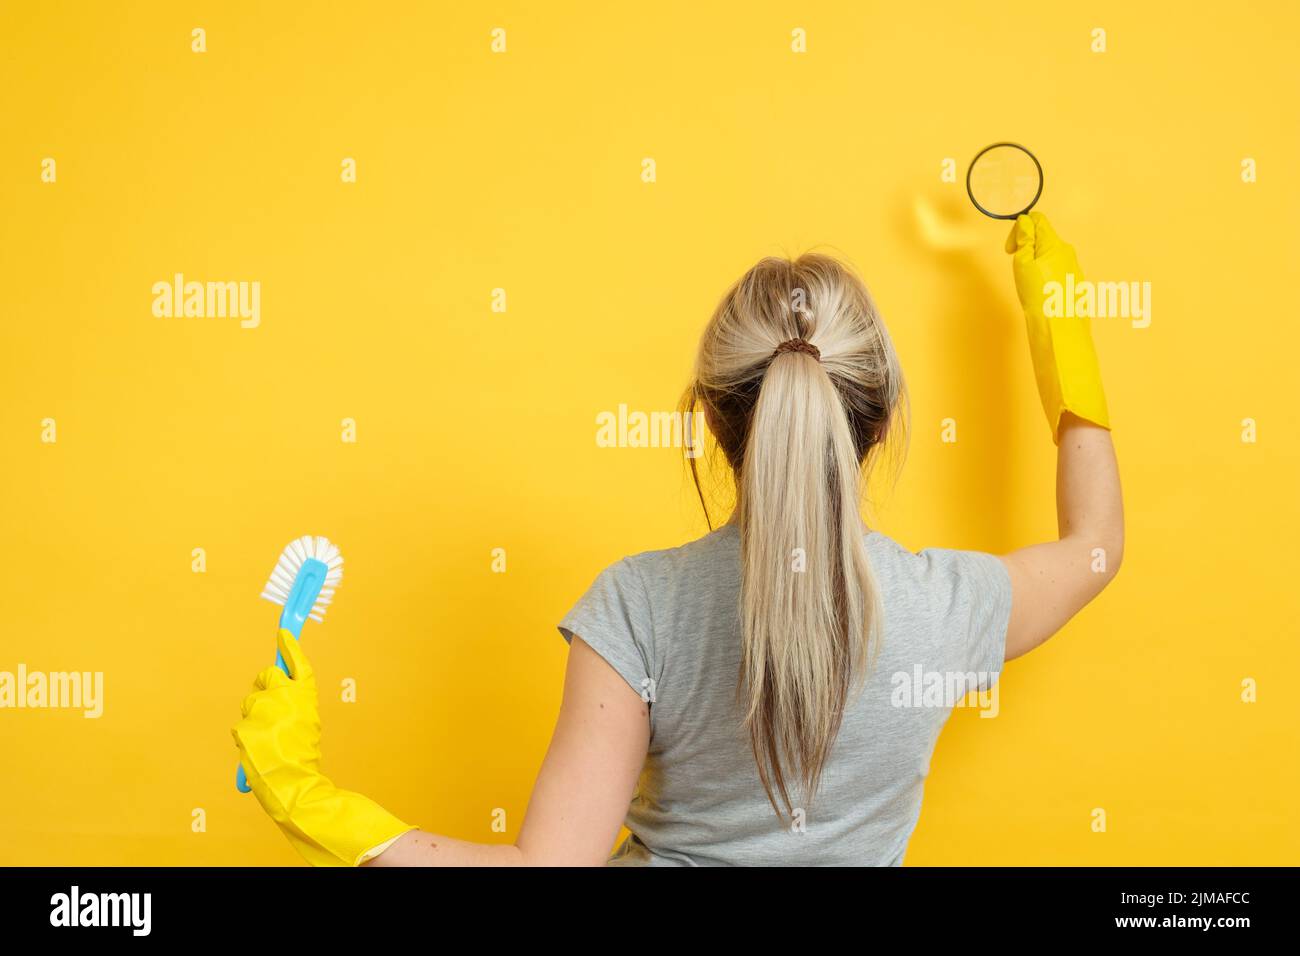 cleaning company home office cleanup magnifier Stock Photo